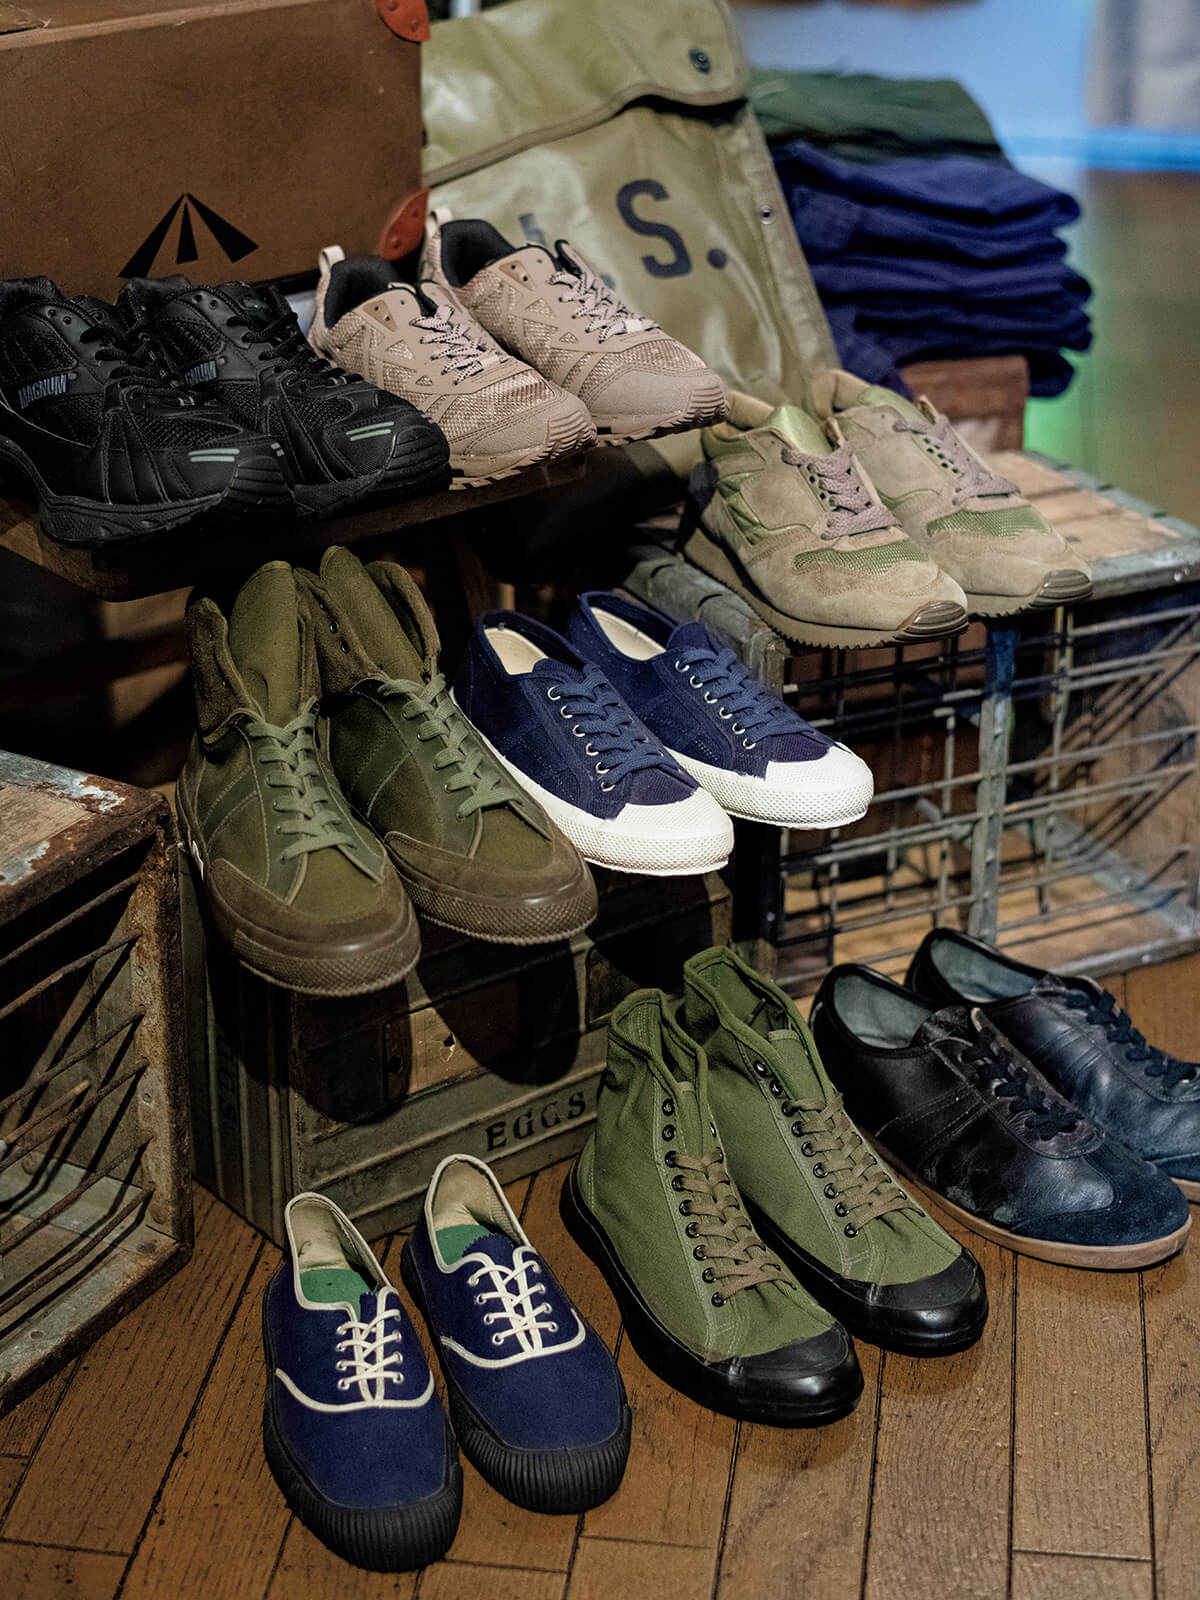 〈AIGLE〉FRENCE NAVY、〈HI-TEC〉BRITISH TRAINER、〈maccheronian〉ITALIAN ARMY TRAINER、〈MAGNUM〉BRITISH TRAINER、〈SKYDEX〉BATTLE TRAINER、〈SPERGA〉ITALIAN NAVY TRAINER、〈US RUBBER COMPANY〉US TRAINER、EAST GERMAN TRAINER